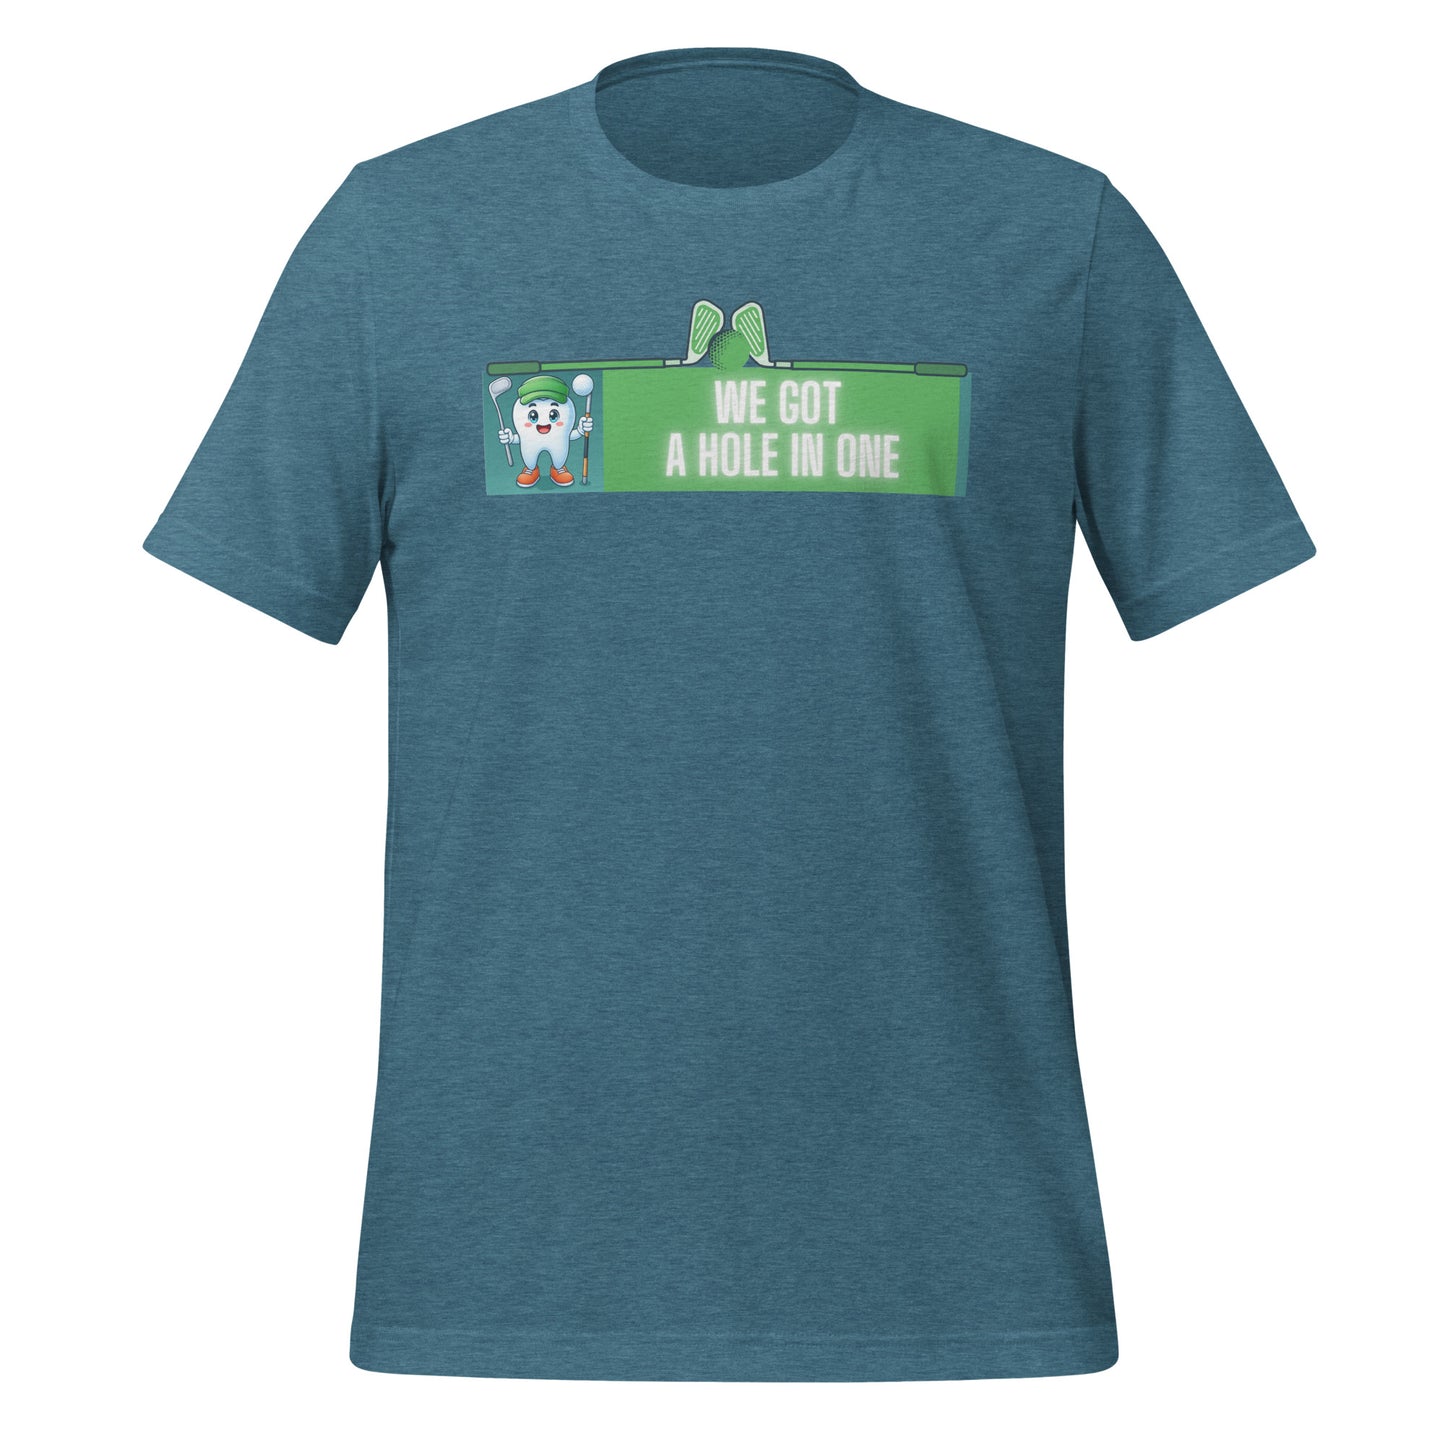 Cute dentist t-shirt showcasing an adorable tooth character in golf attire, joyfully celebrating a ‘hole in one’ achievement, perfect for dentist and dental professionals seeking unique and thematic dental apparel. Heather deep teal color, front view.